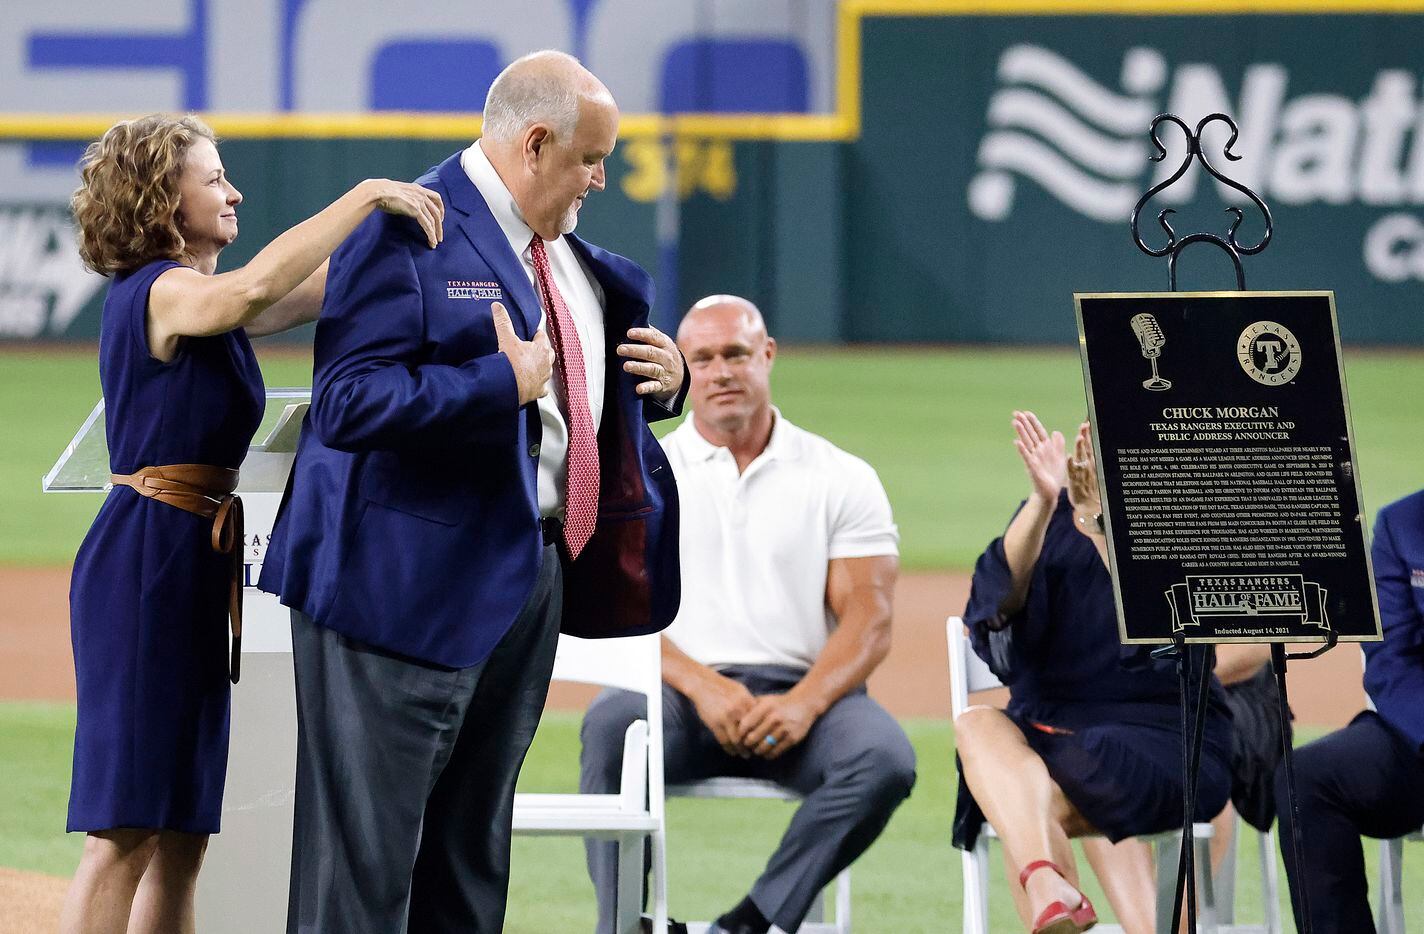 Texas Rangers executive vice president and public address announcer Chuck Morgan receives help with his blue jacket from his presenter and Rangers CFO Kellie Fischer during the Texas Rangers Baseball Hall of Fame induction ceremony at Globe Life Field in Arlington, Saturday, August 14, 2021.(Tom Fox/The Dallas Morning News)